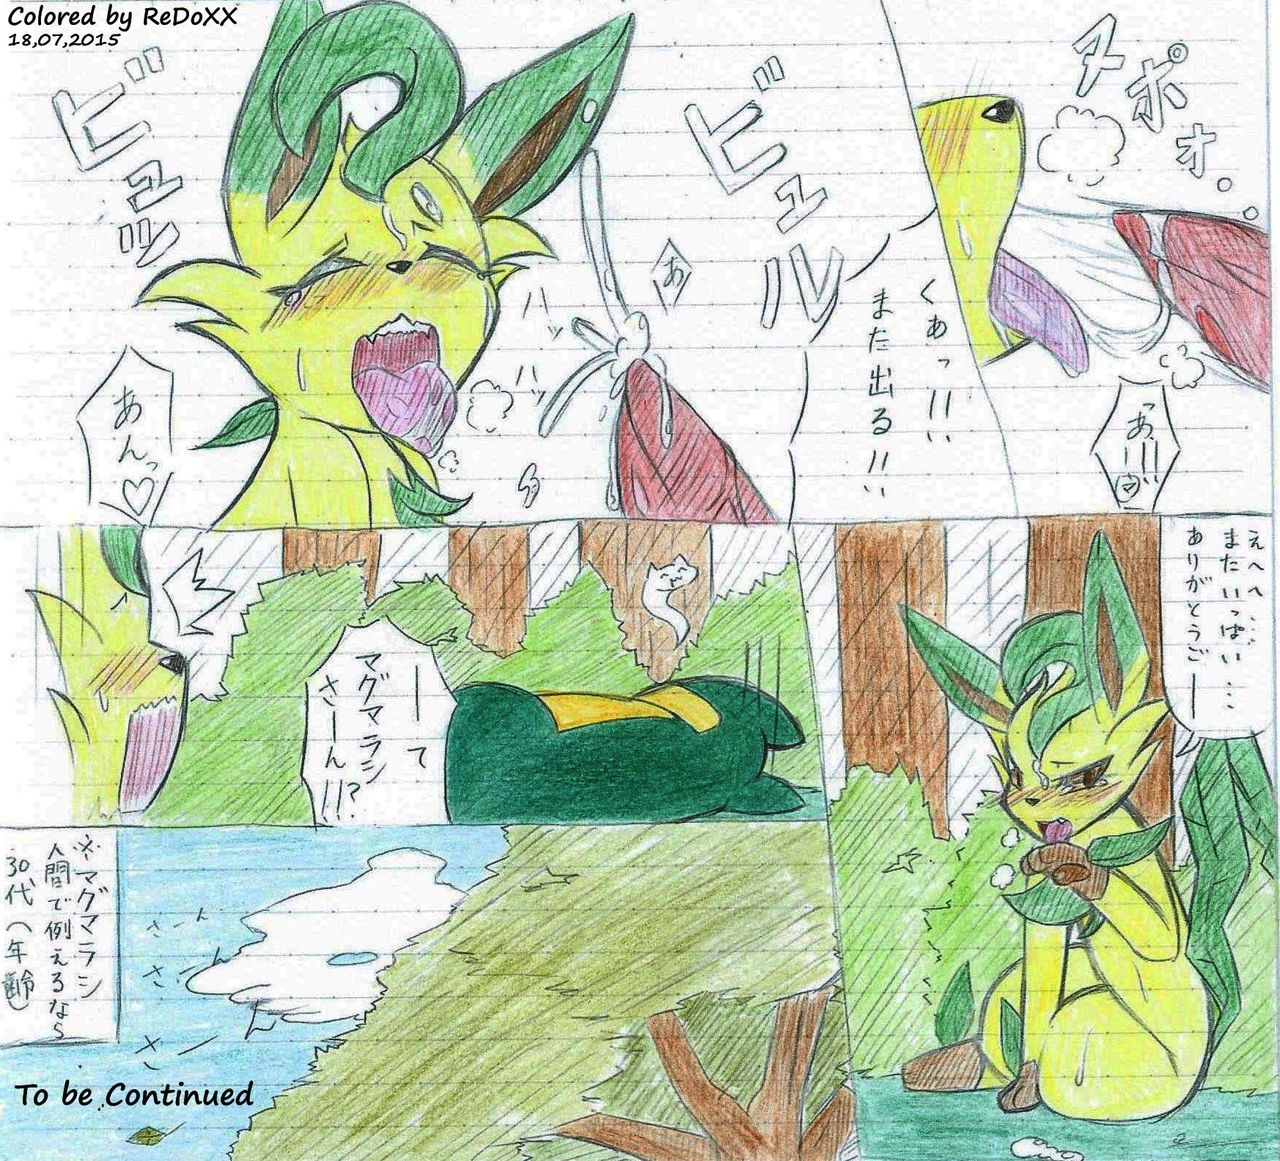 Leafeon X Quilava [Colorized by ReDoXX] 15